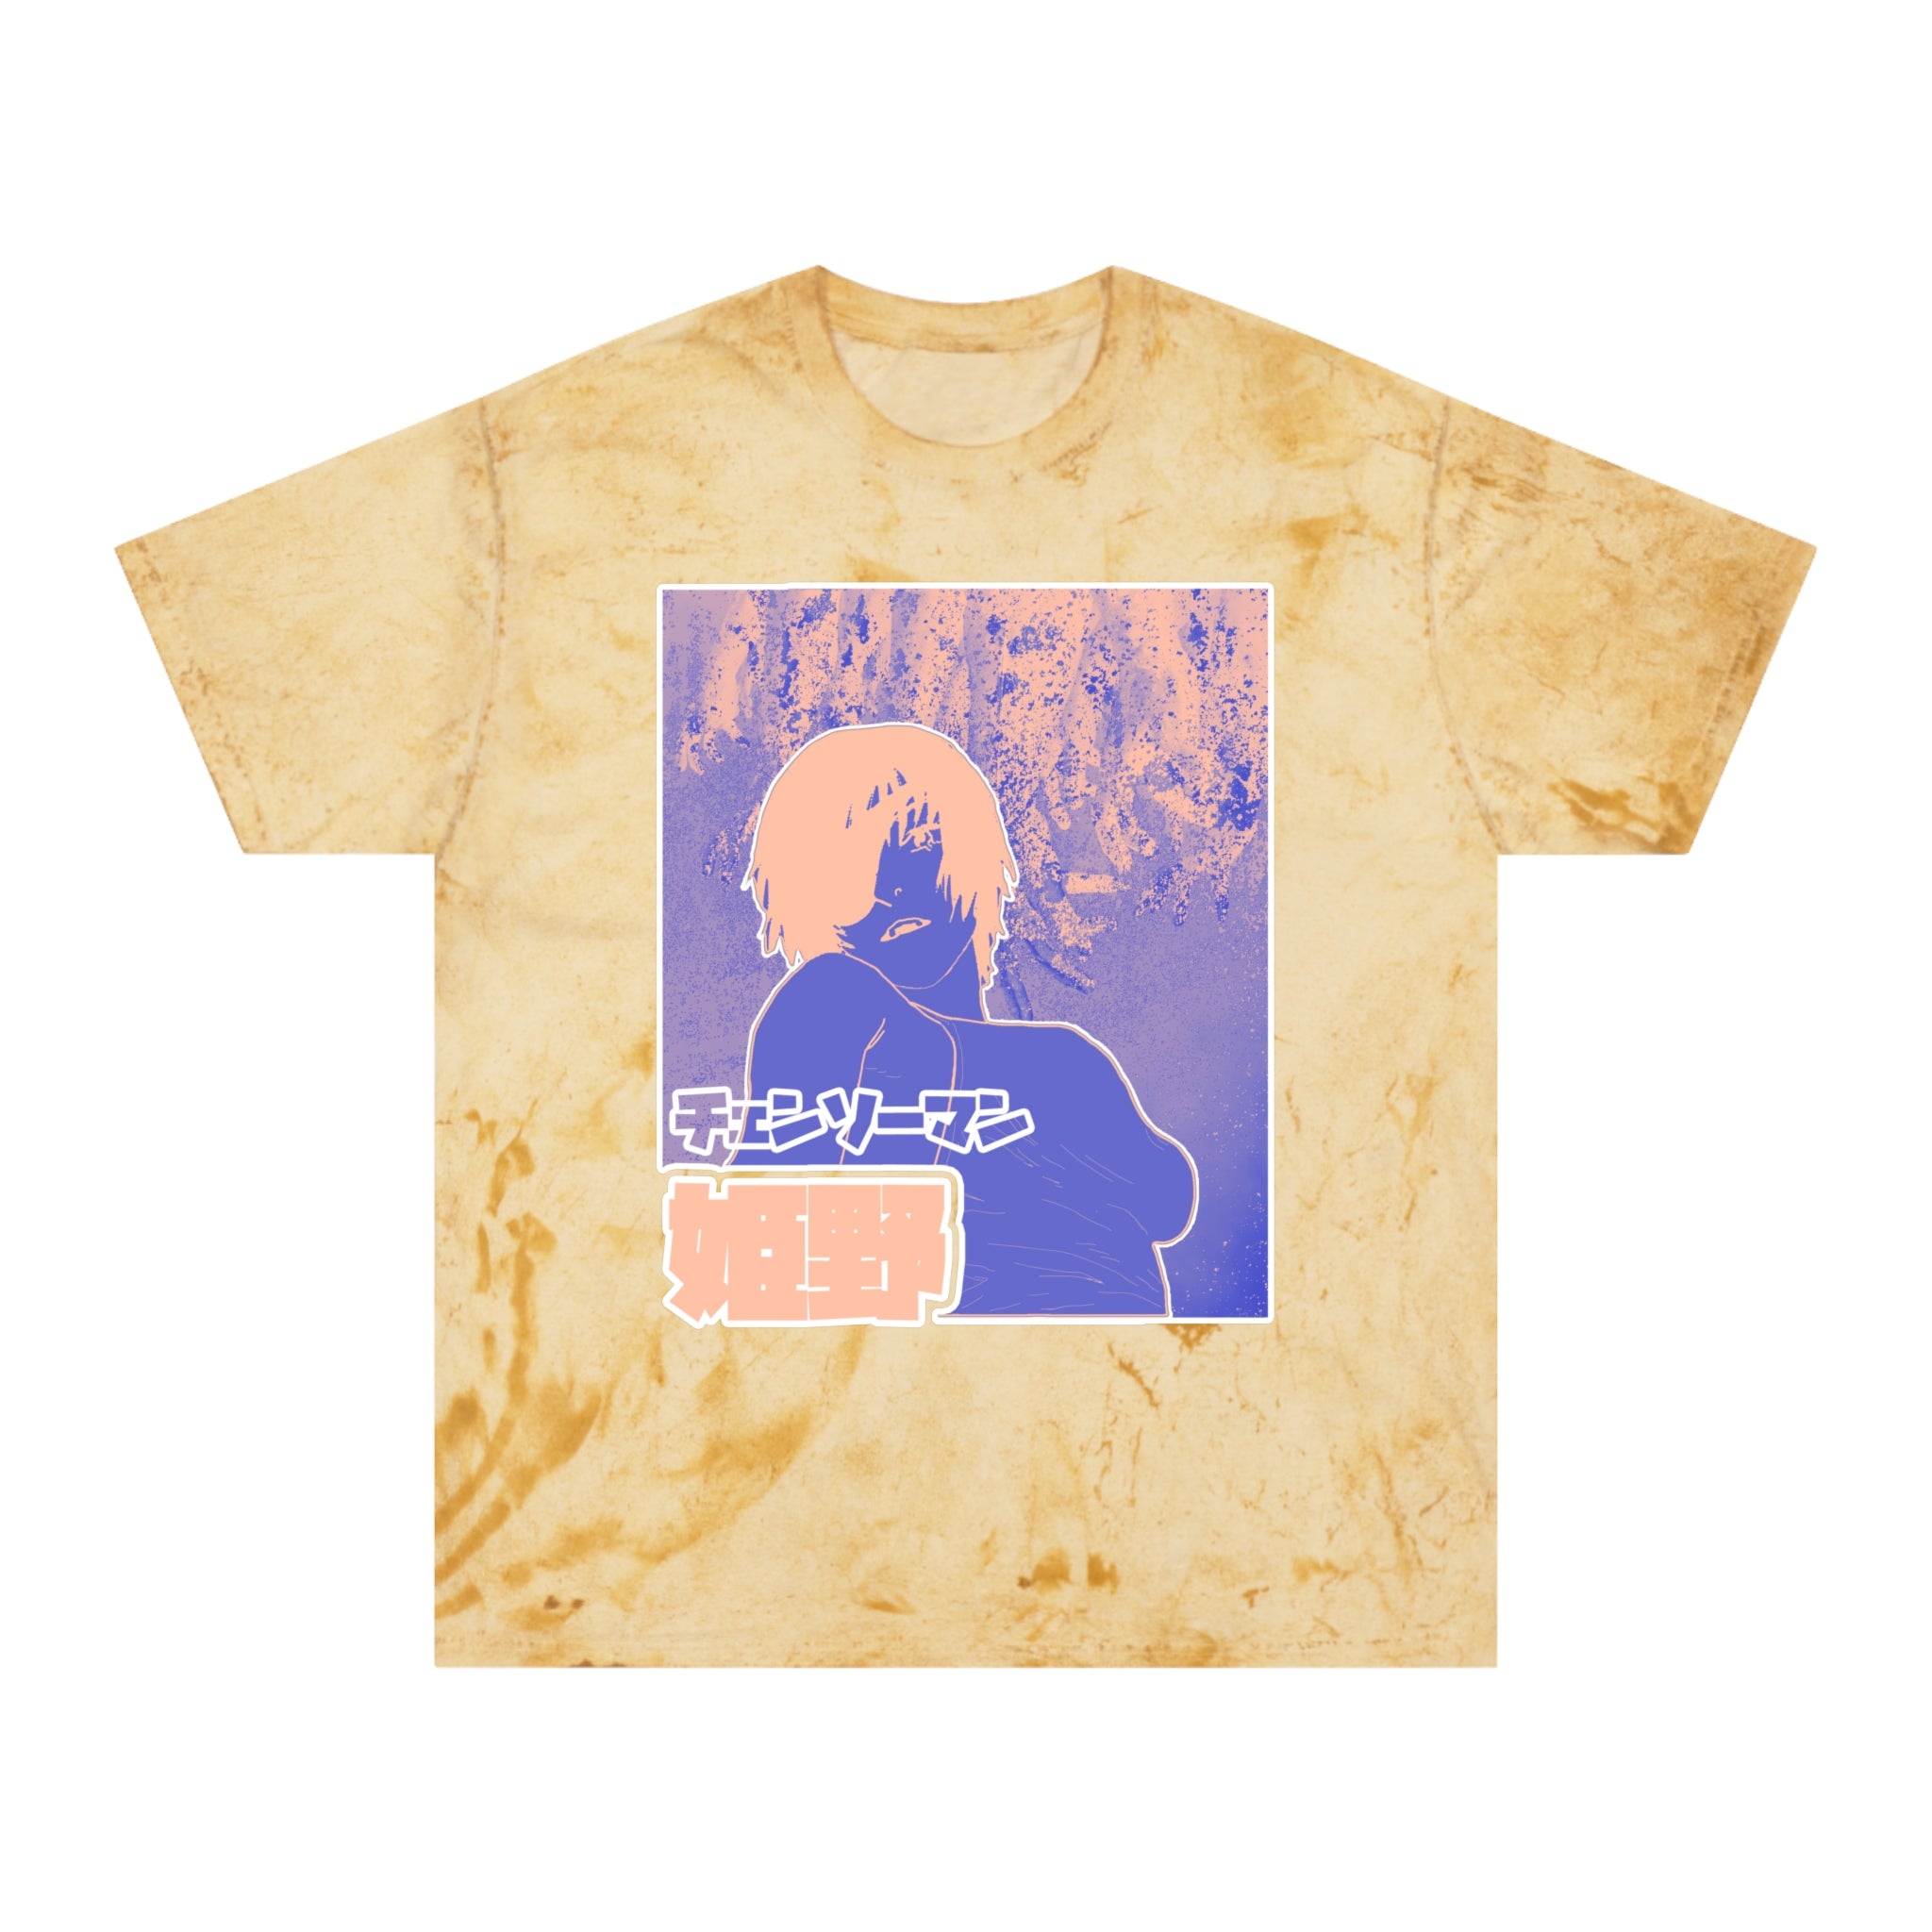 My Place Garment Dyed Tee